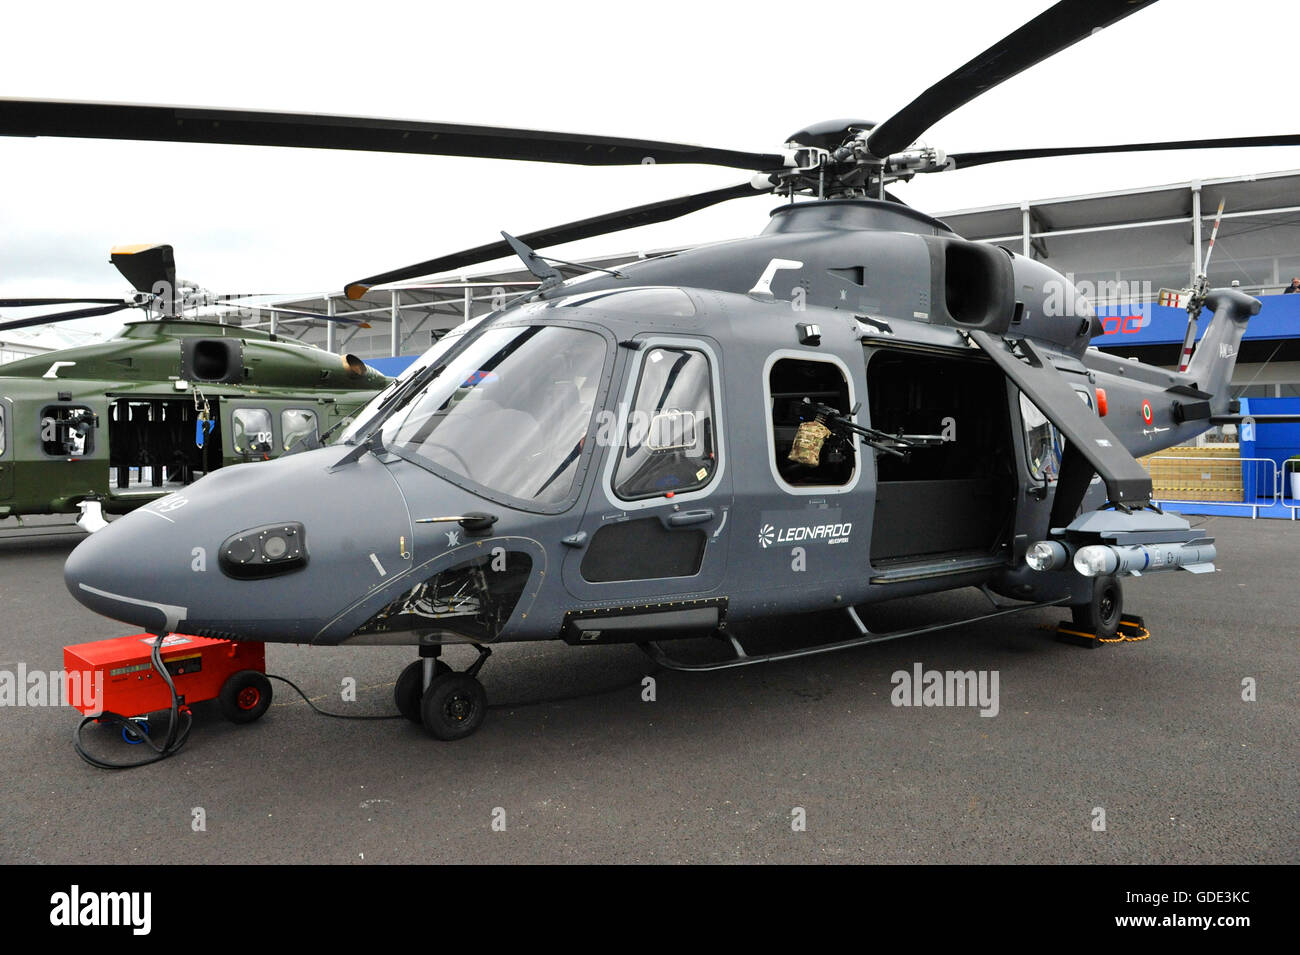 Farnborough, UK. 15th July, 2016. A Finmeccanica AW149 medium category military helicopter on display at the Farnborough International Airshow (FIA) which took place today in Farnborough, UK.  The air show, a biannual showcase for the aviation industry, is the biggest of it's kind and attracts civil and military buyers from all over the world. trade visitors are normally in excess of 100,000 people. The show runs until July 17. Credit:  Michael Preston/Alamy Live News Stock Photo